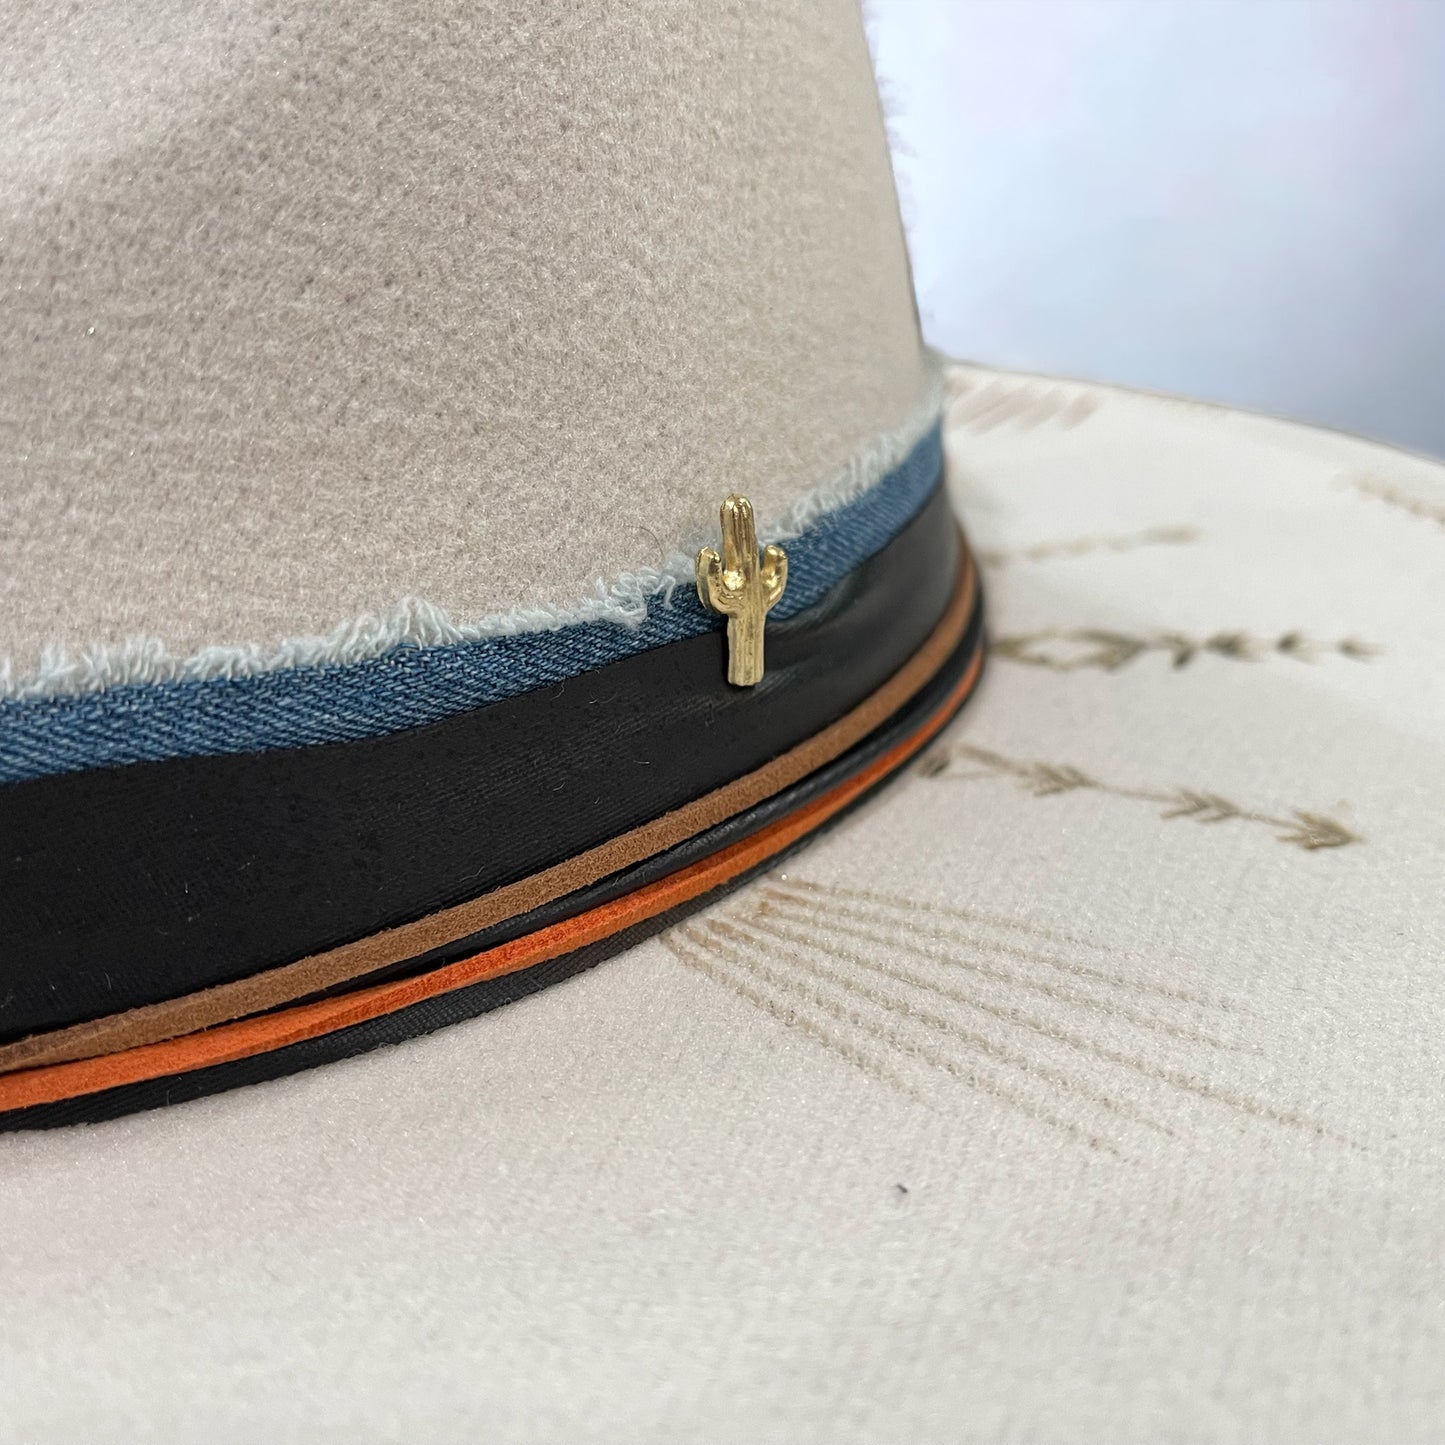 Illume- Alchemy Collection Burned & Stitched Hat